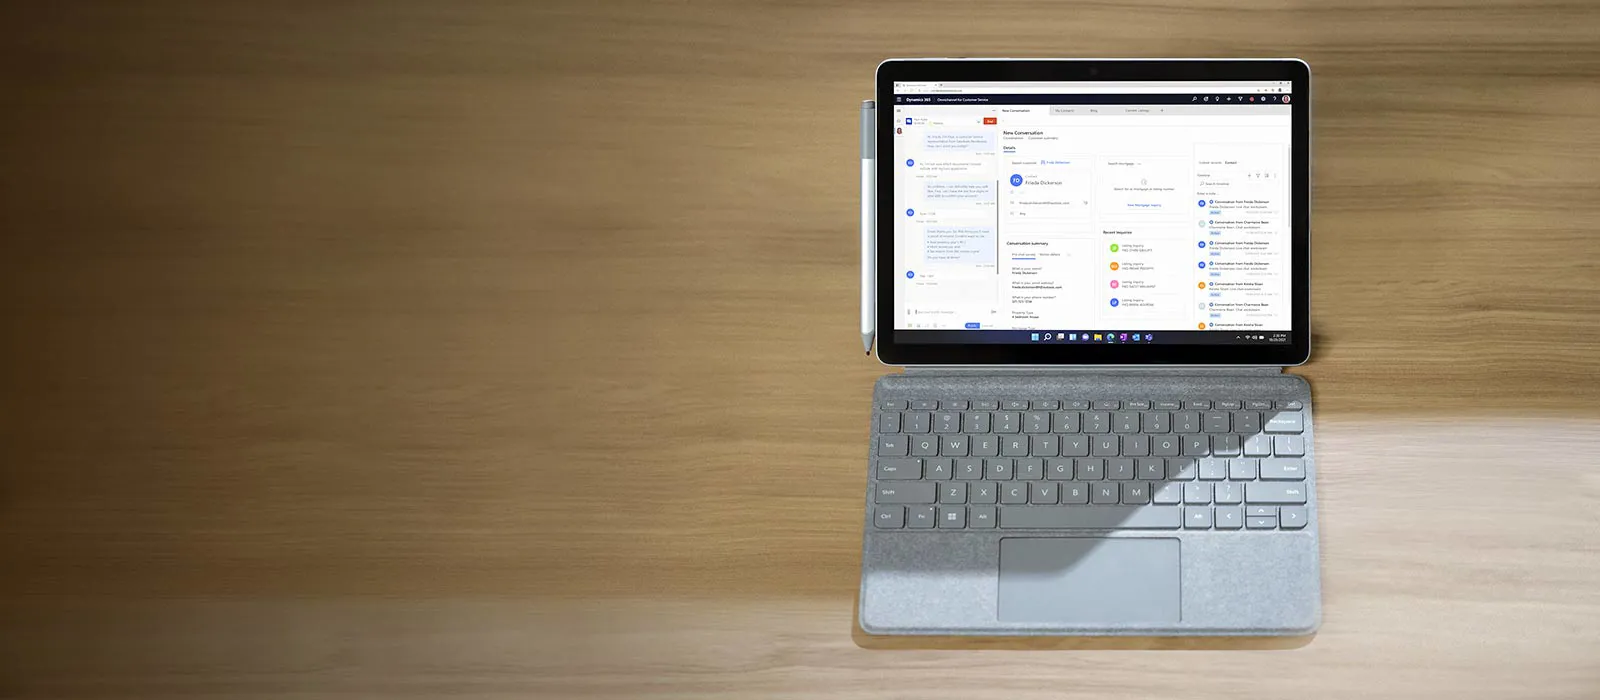 A Surface Go 4 is standing on a wooden surface in laptop mode, with the Dynamics 365 application open on the Surface screen